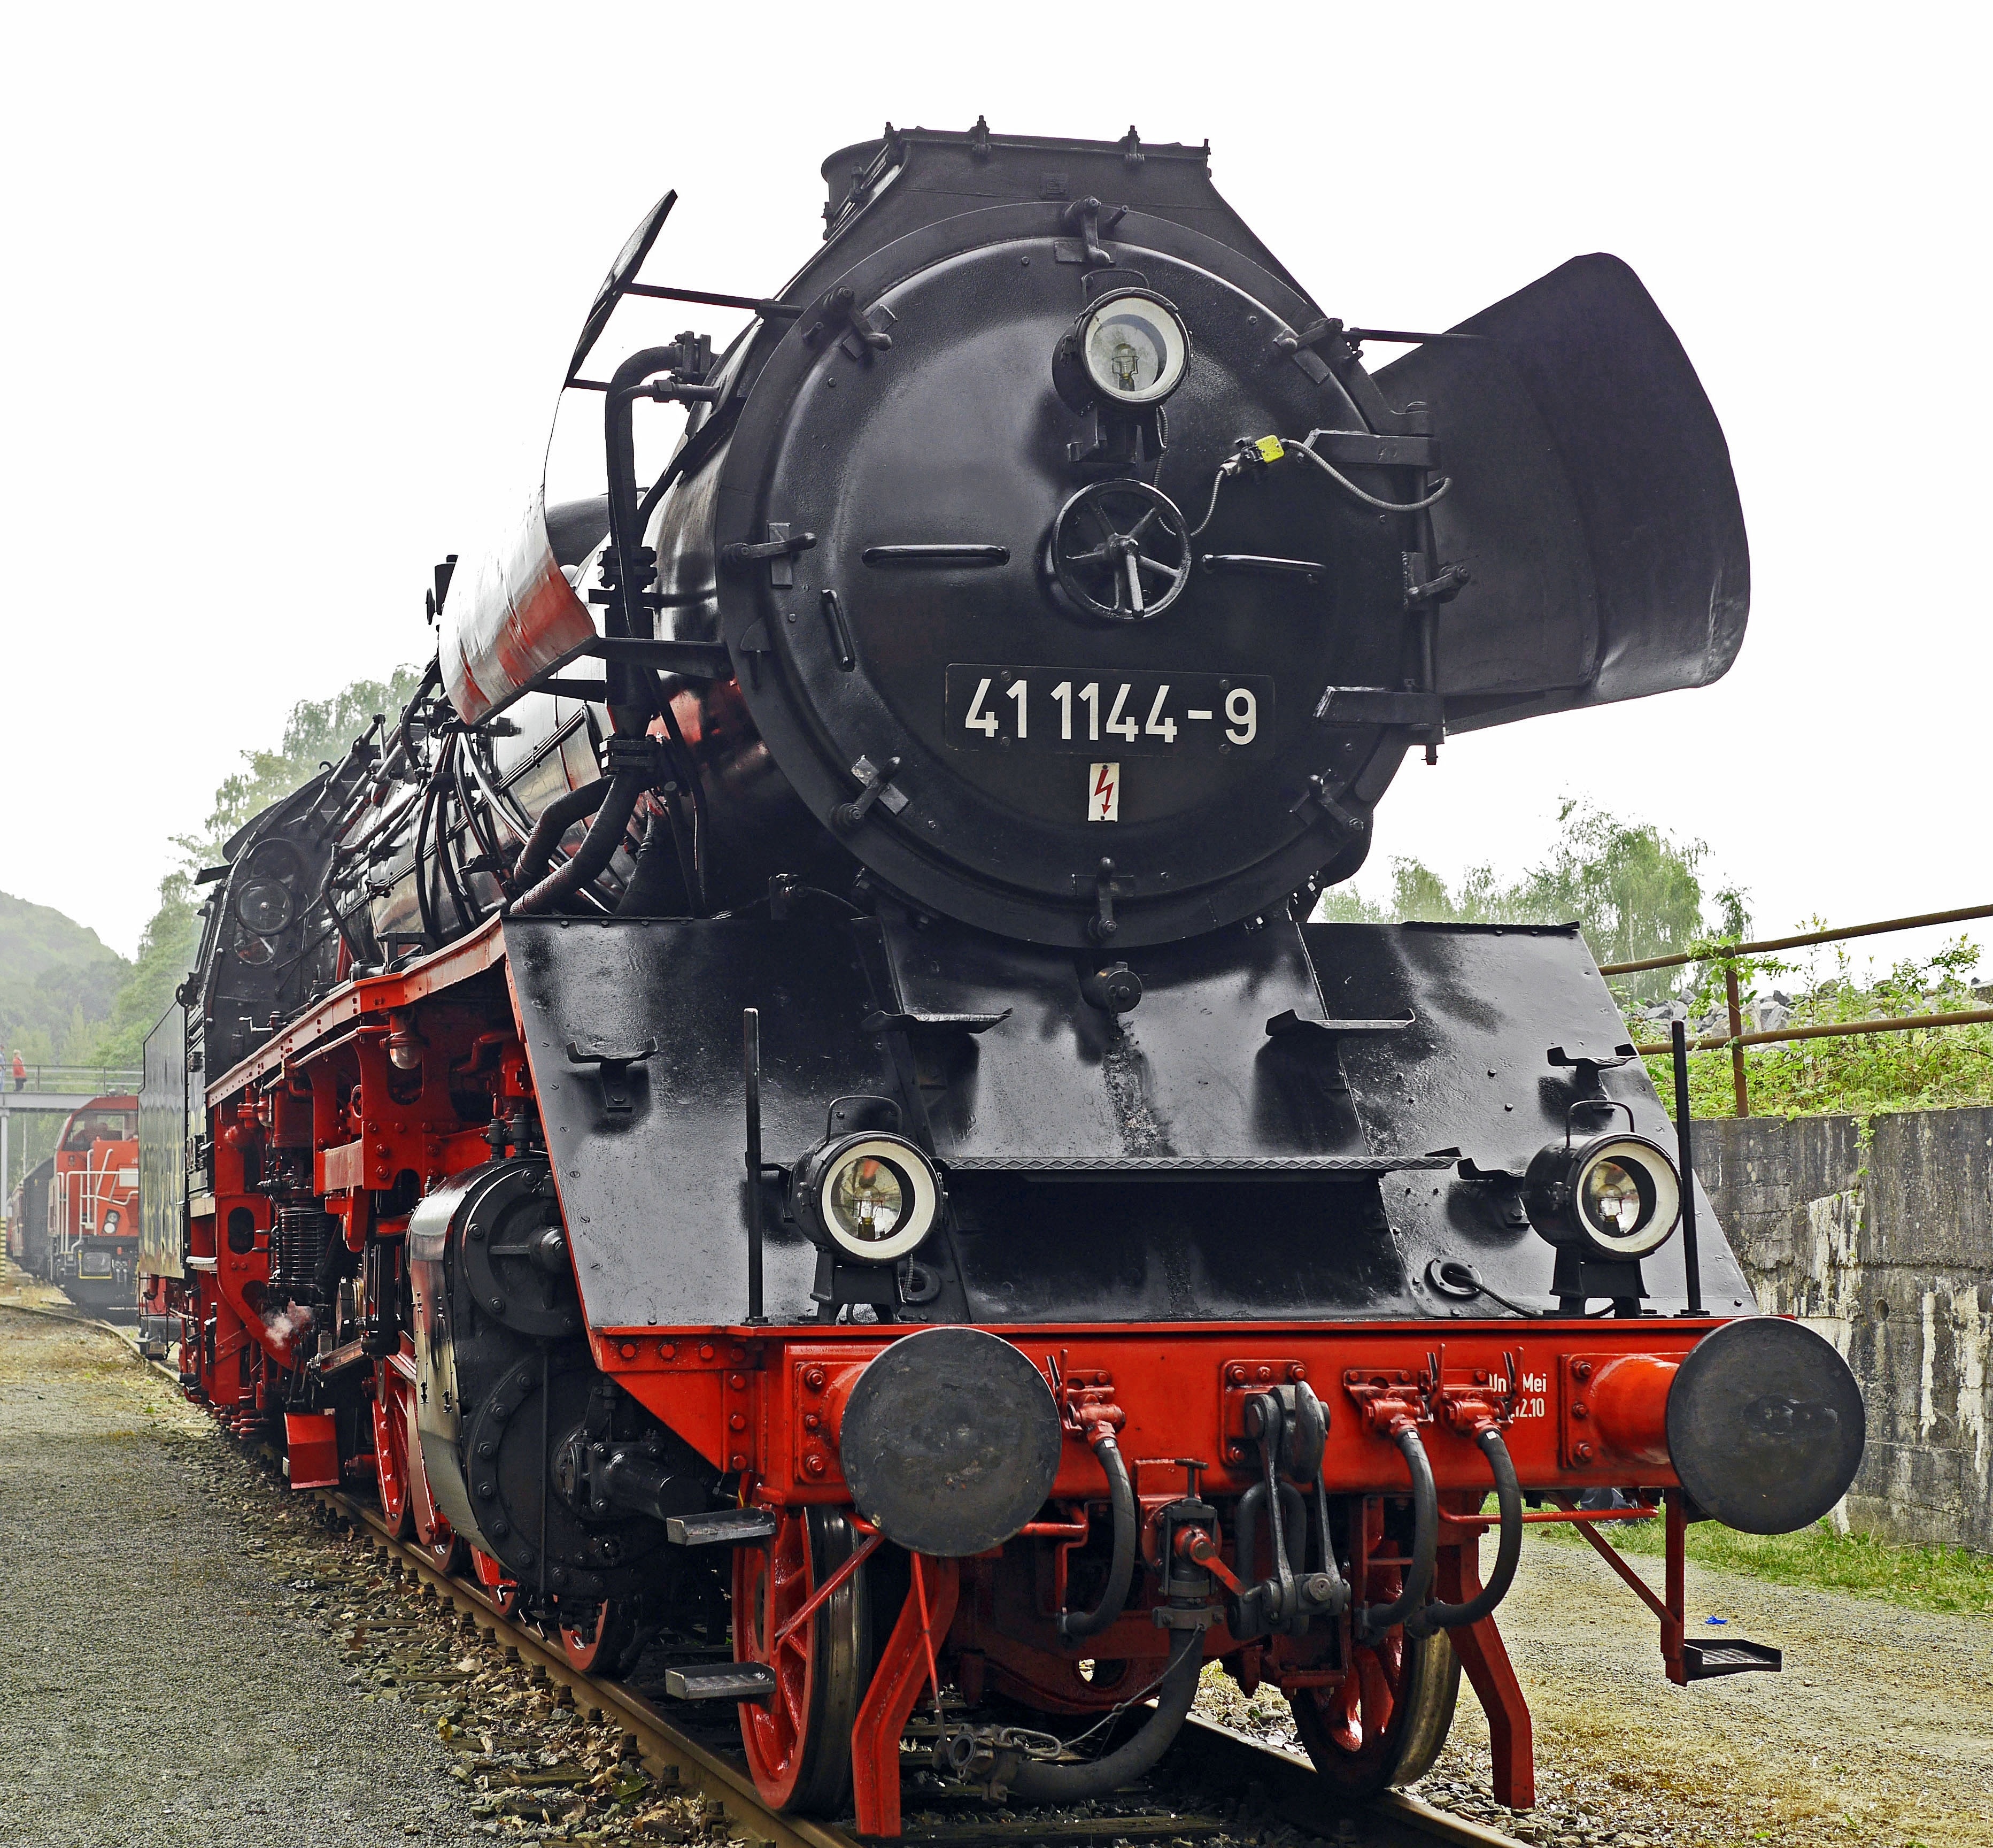 red and black 41114409 locomotive